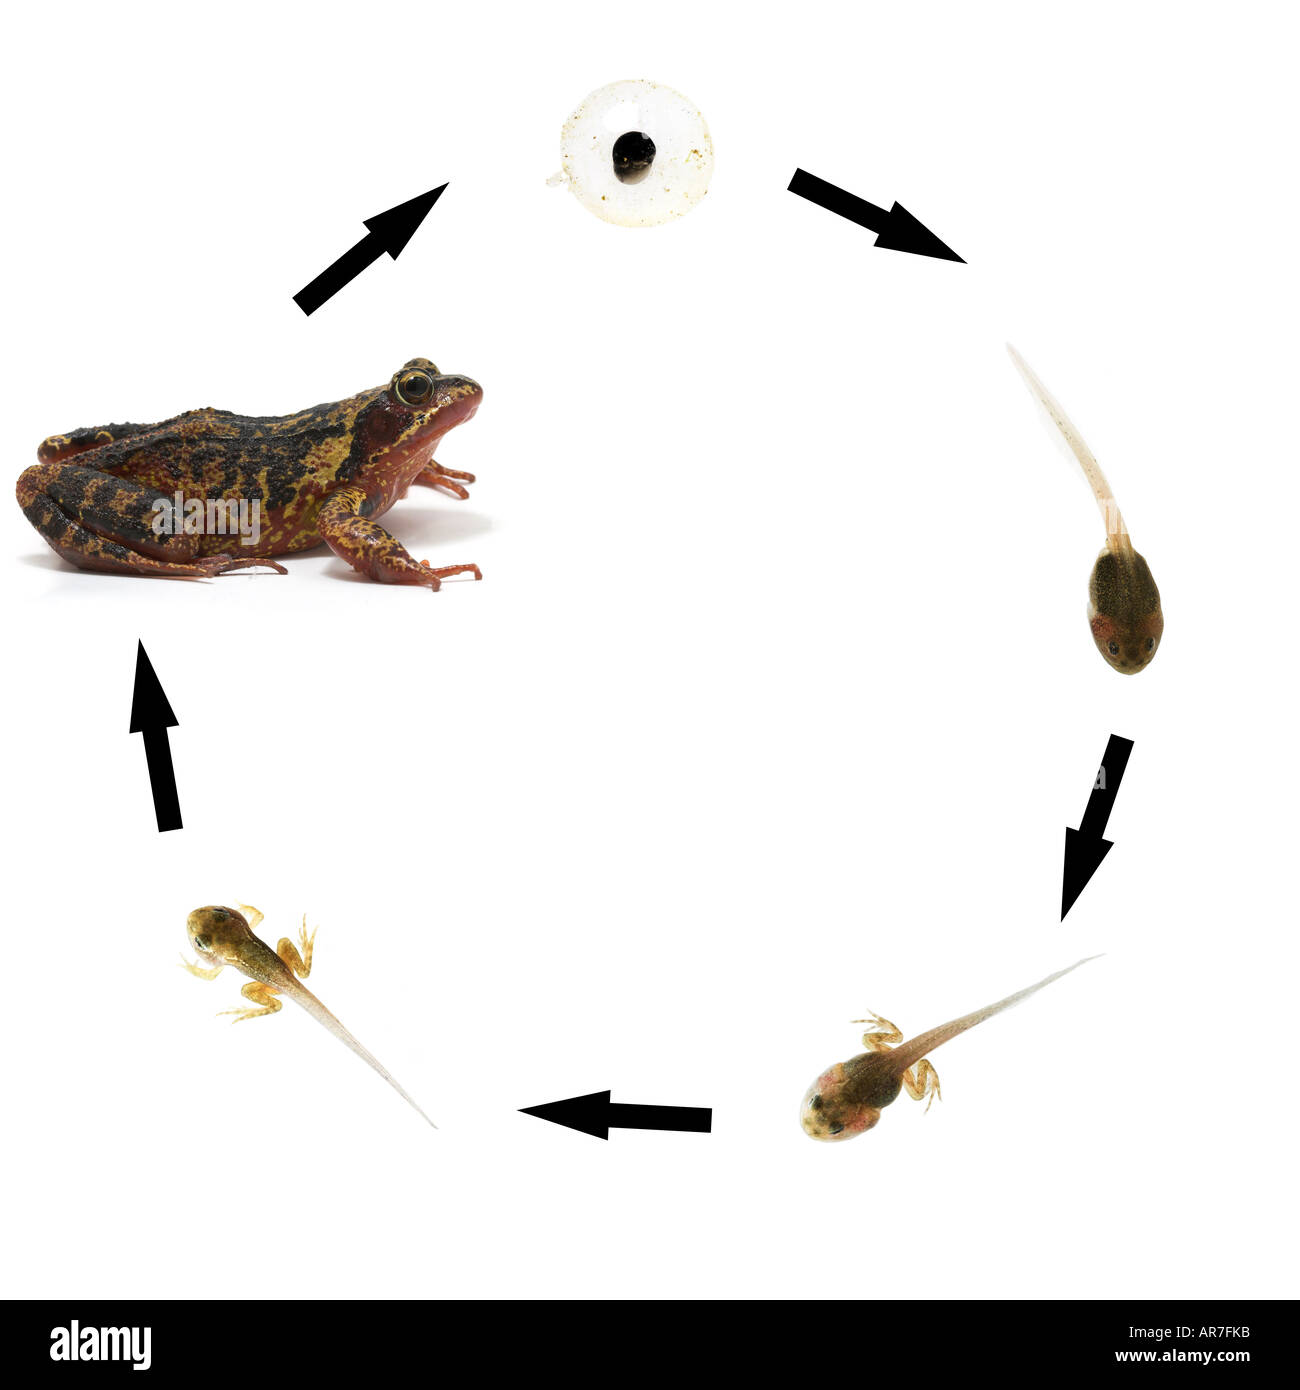 Common frog lifecycle sequence showing development from frogspawn via tadpole to adult frog Rana temporaria Stock Photo